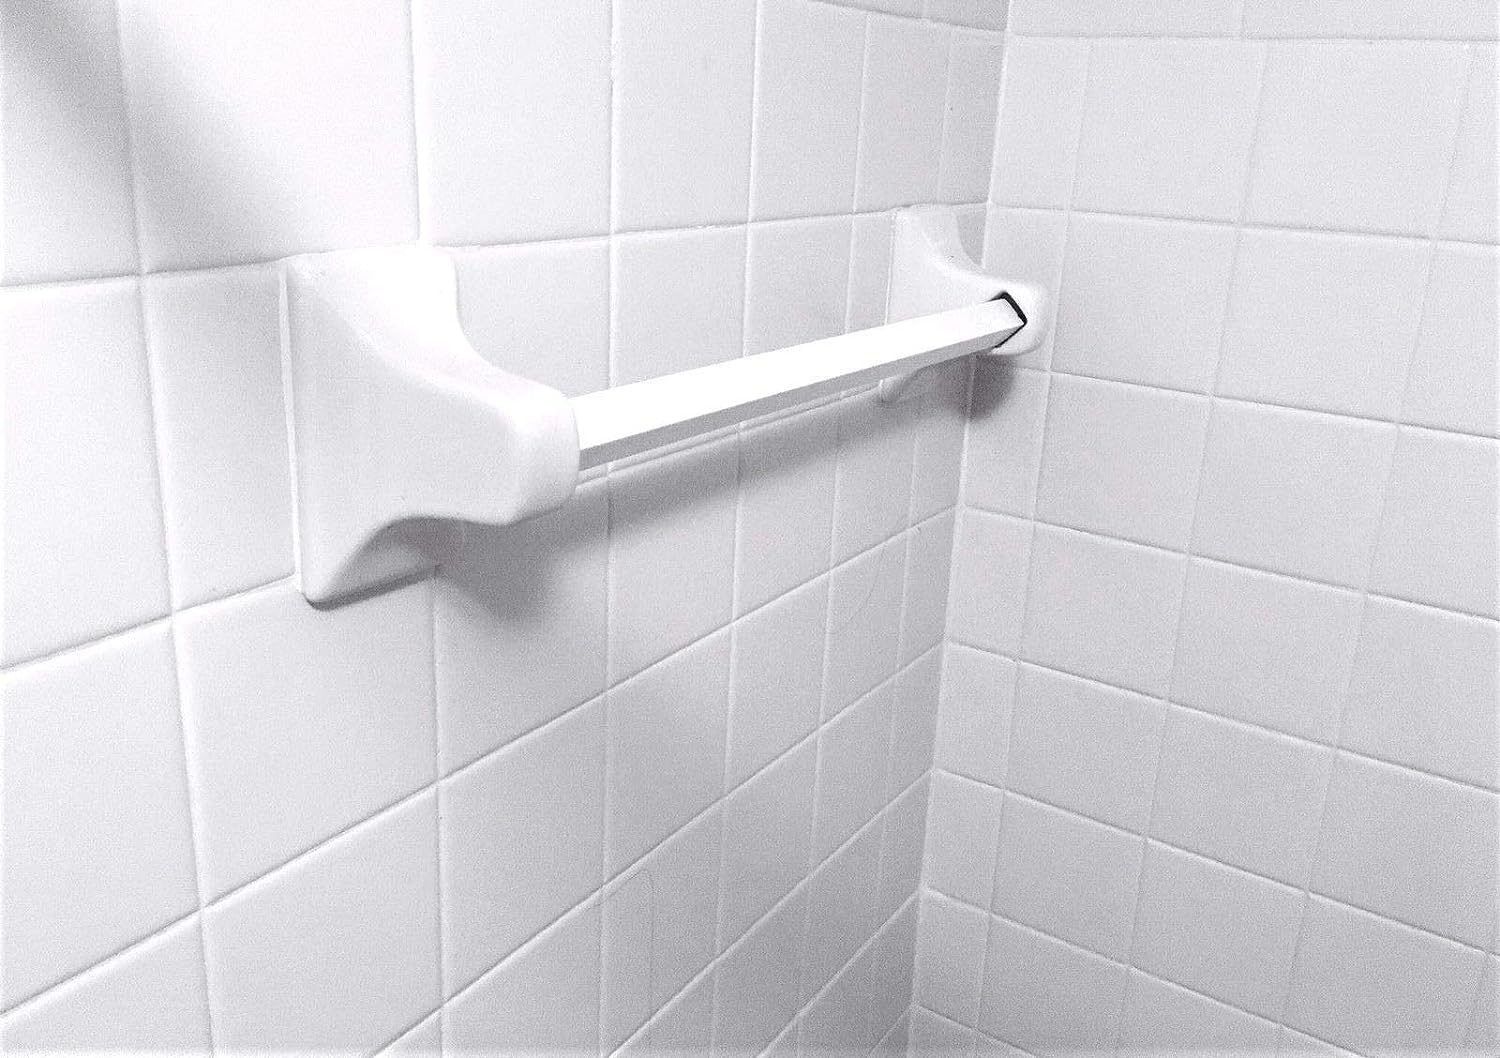 How To Remove Ceramic Towel Bar Holder From Ceramic Wall